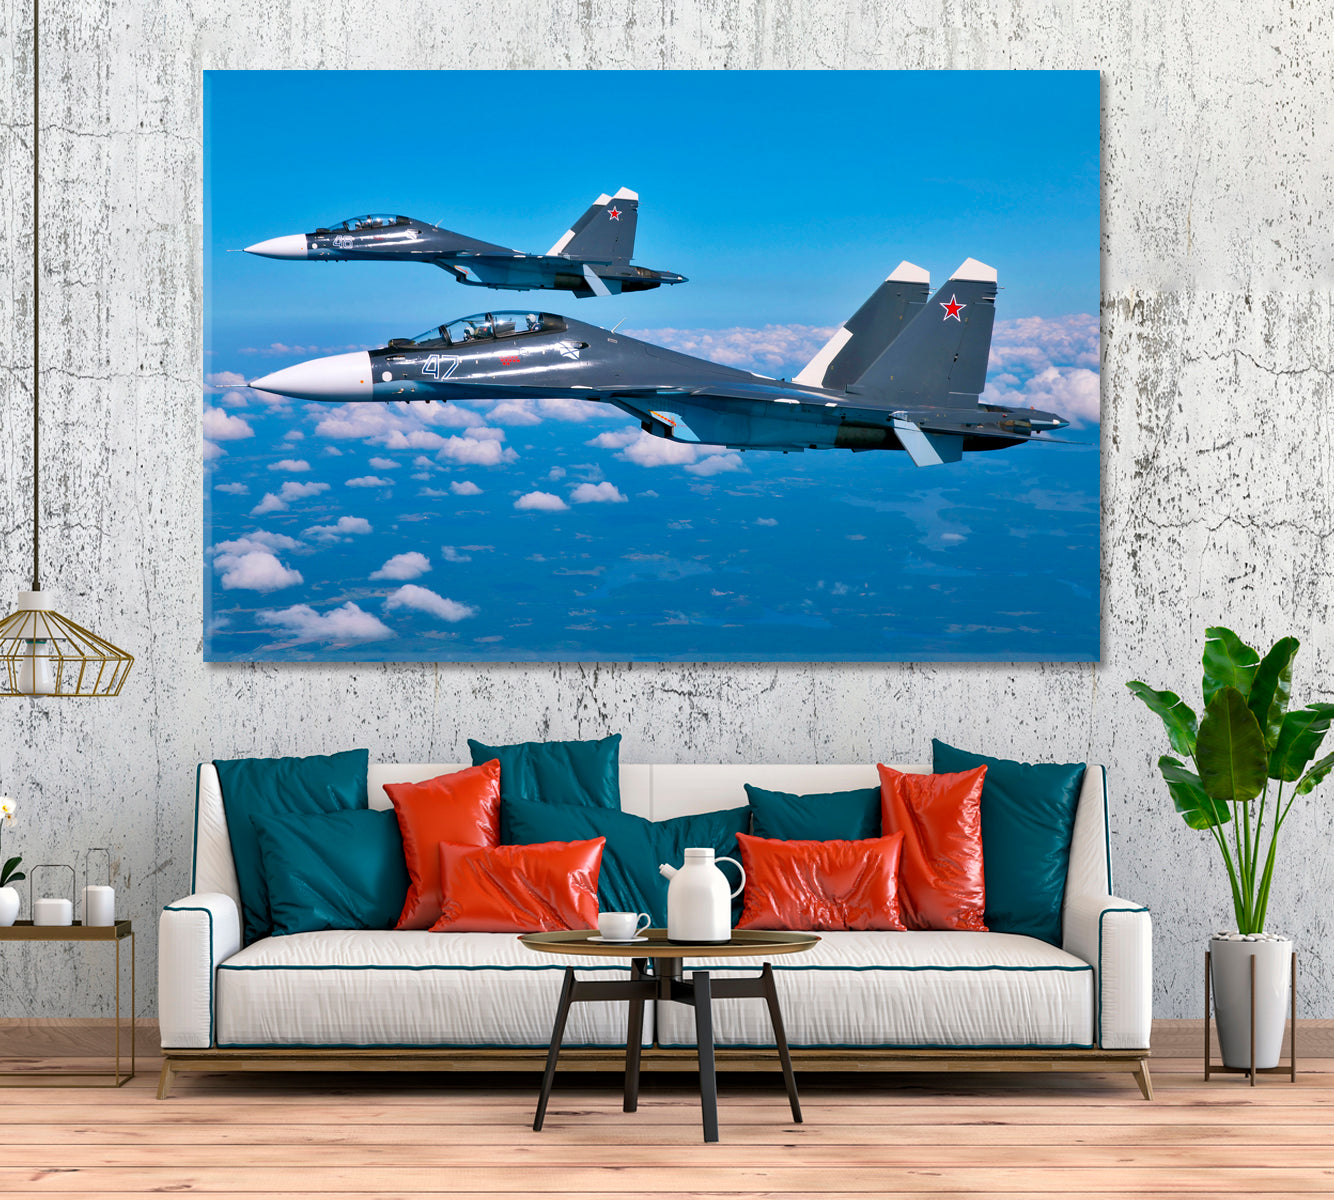 Sukhoi Su-30SM (Flanker-C) Jet in Flight Canvas Print ArtLexy 1 Panel 24"x16" inches 